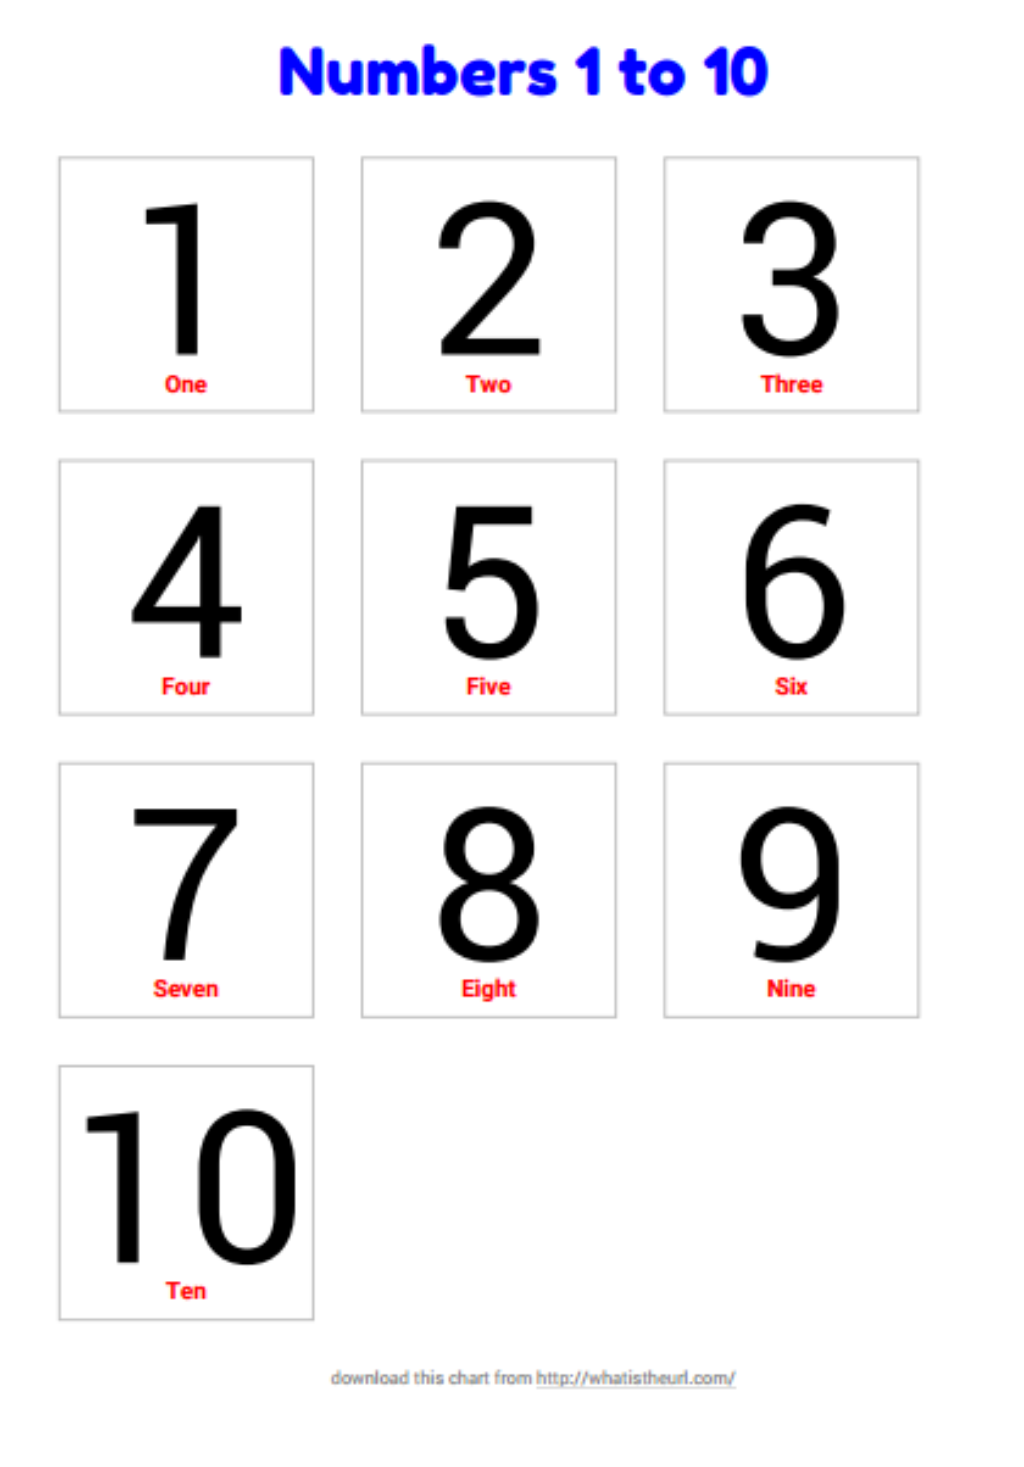 counting-numbers-1-to-10-your-home-teacher